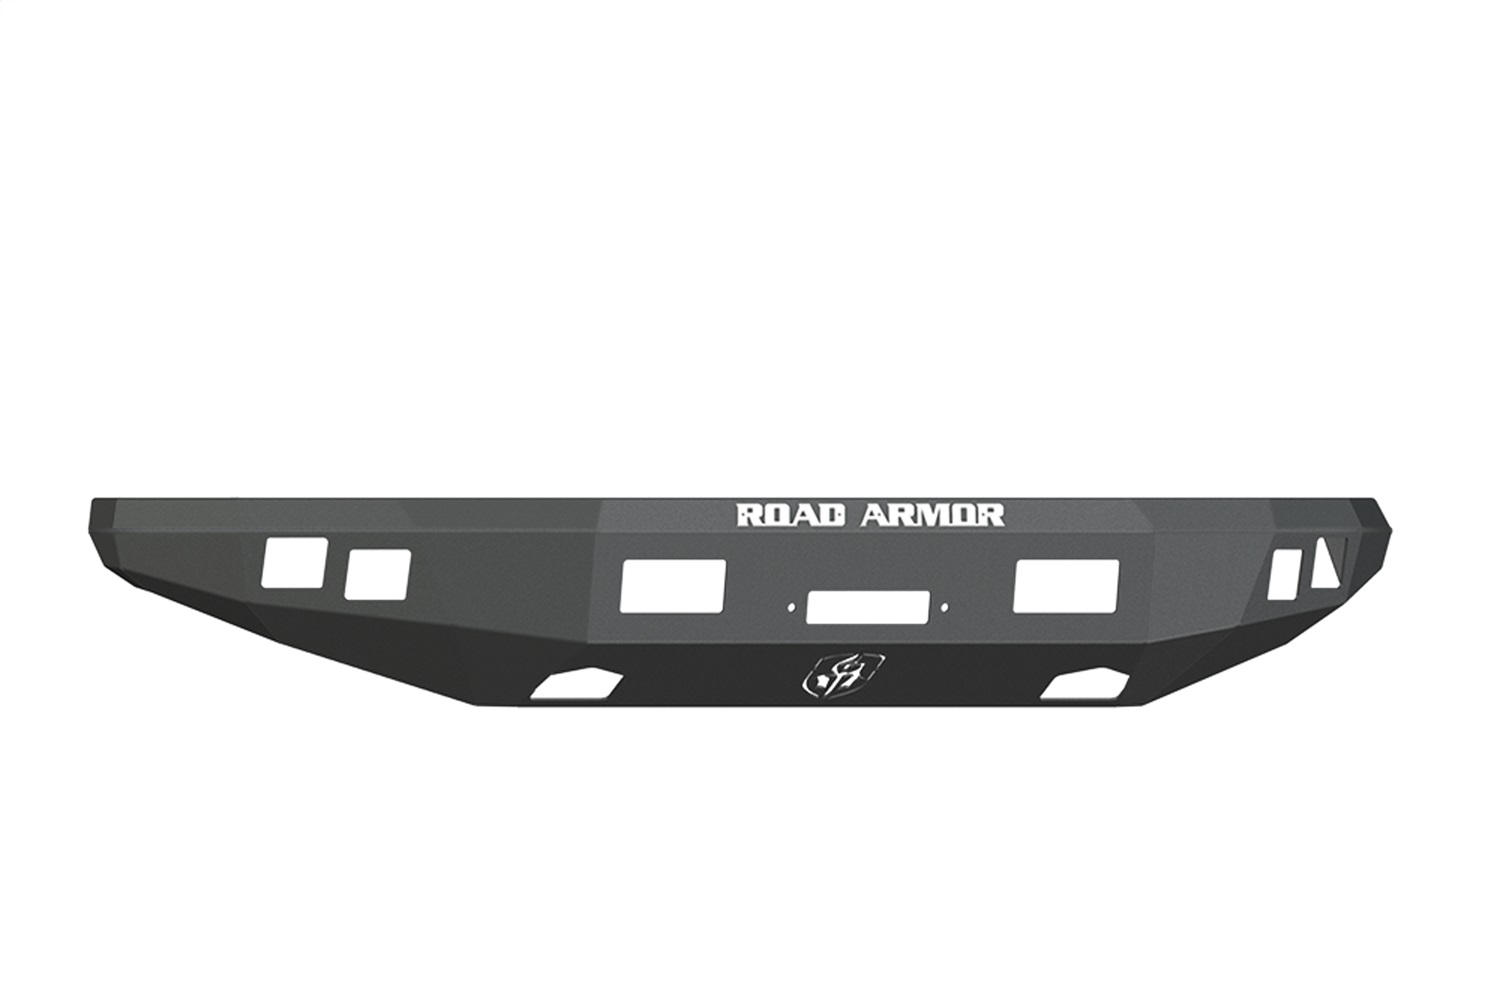 Road Armor Road Armor 614R0B Front Stealth Bumper Fits 10-14 F-150